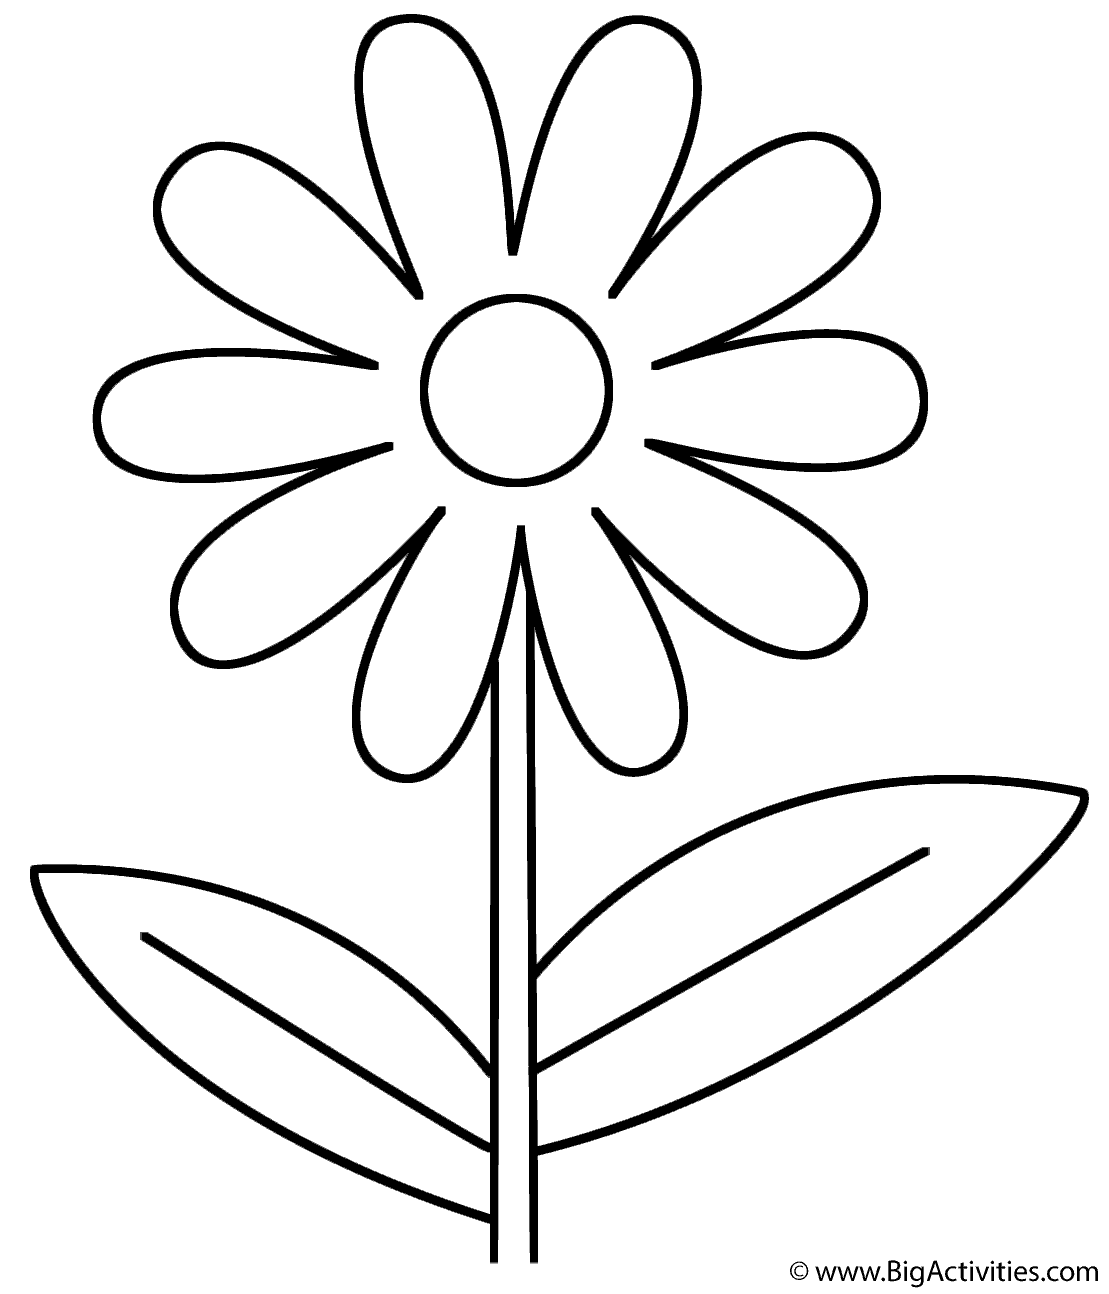 Flower - Coloring Page (Summer)